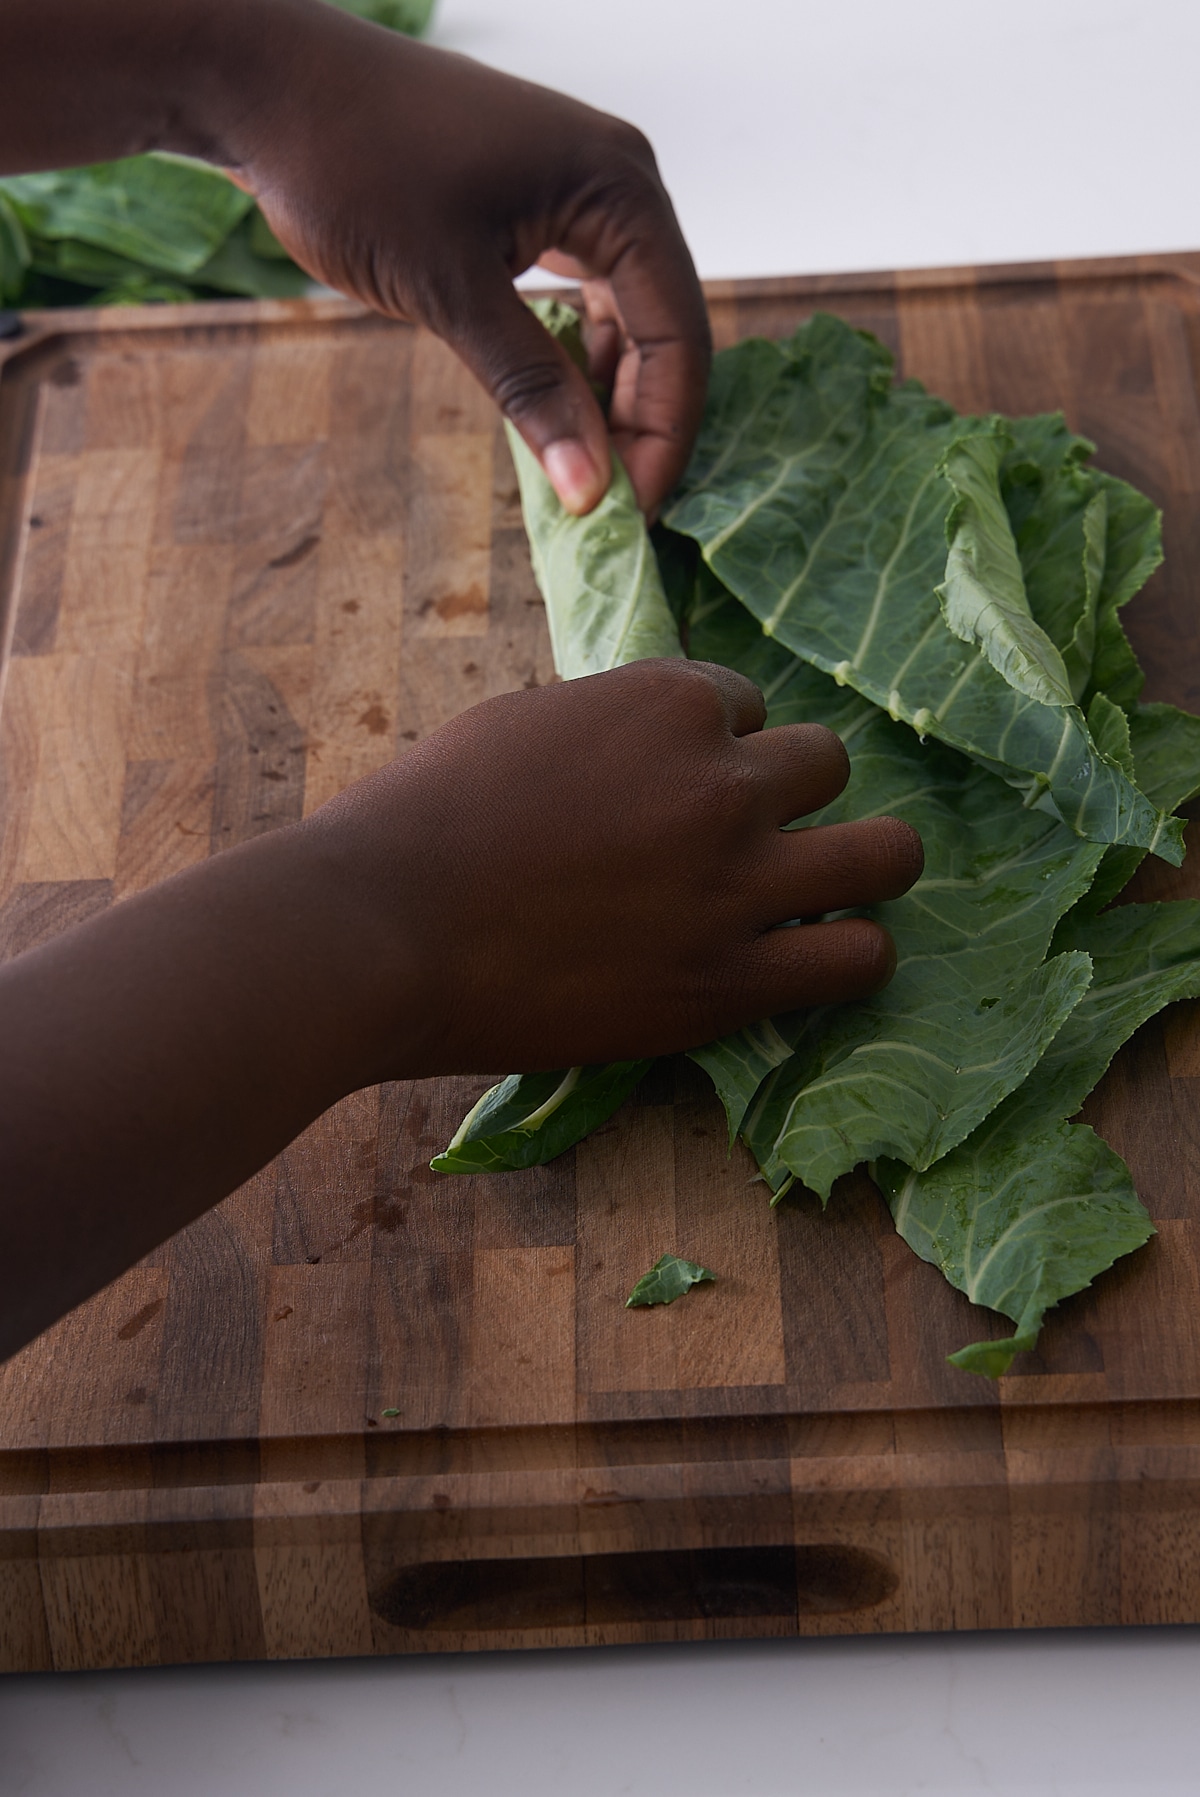 collard greens being rolled up